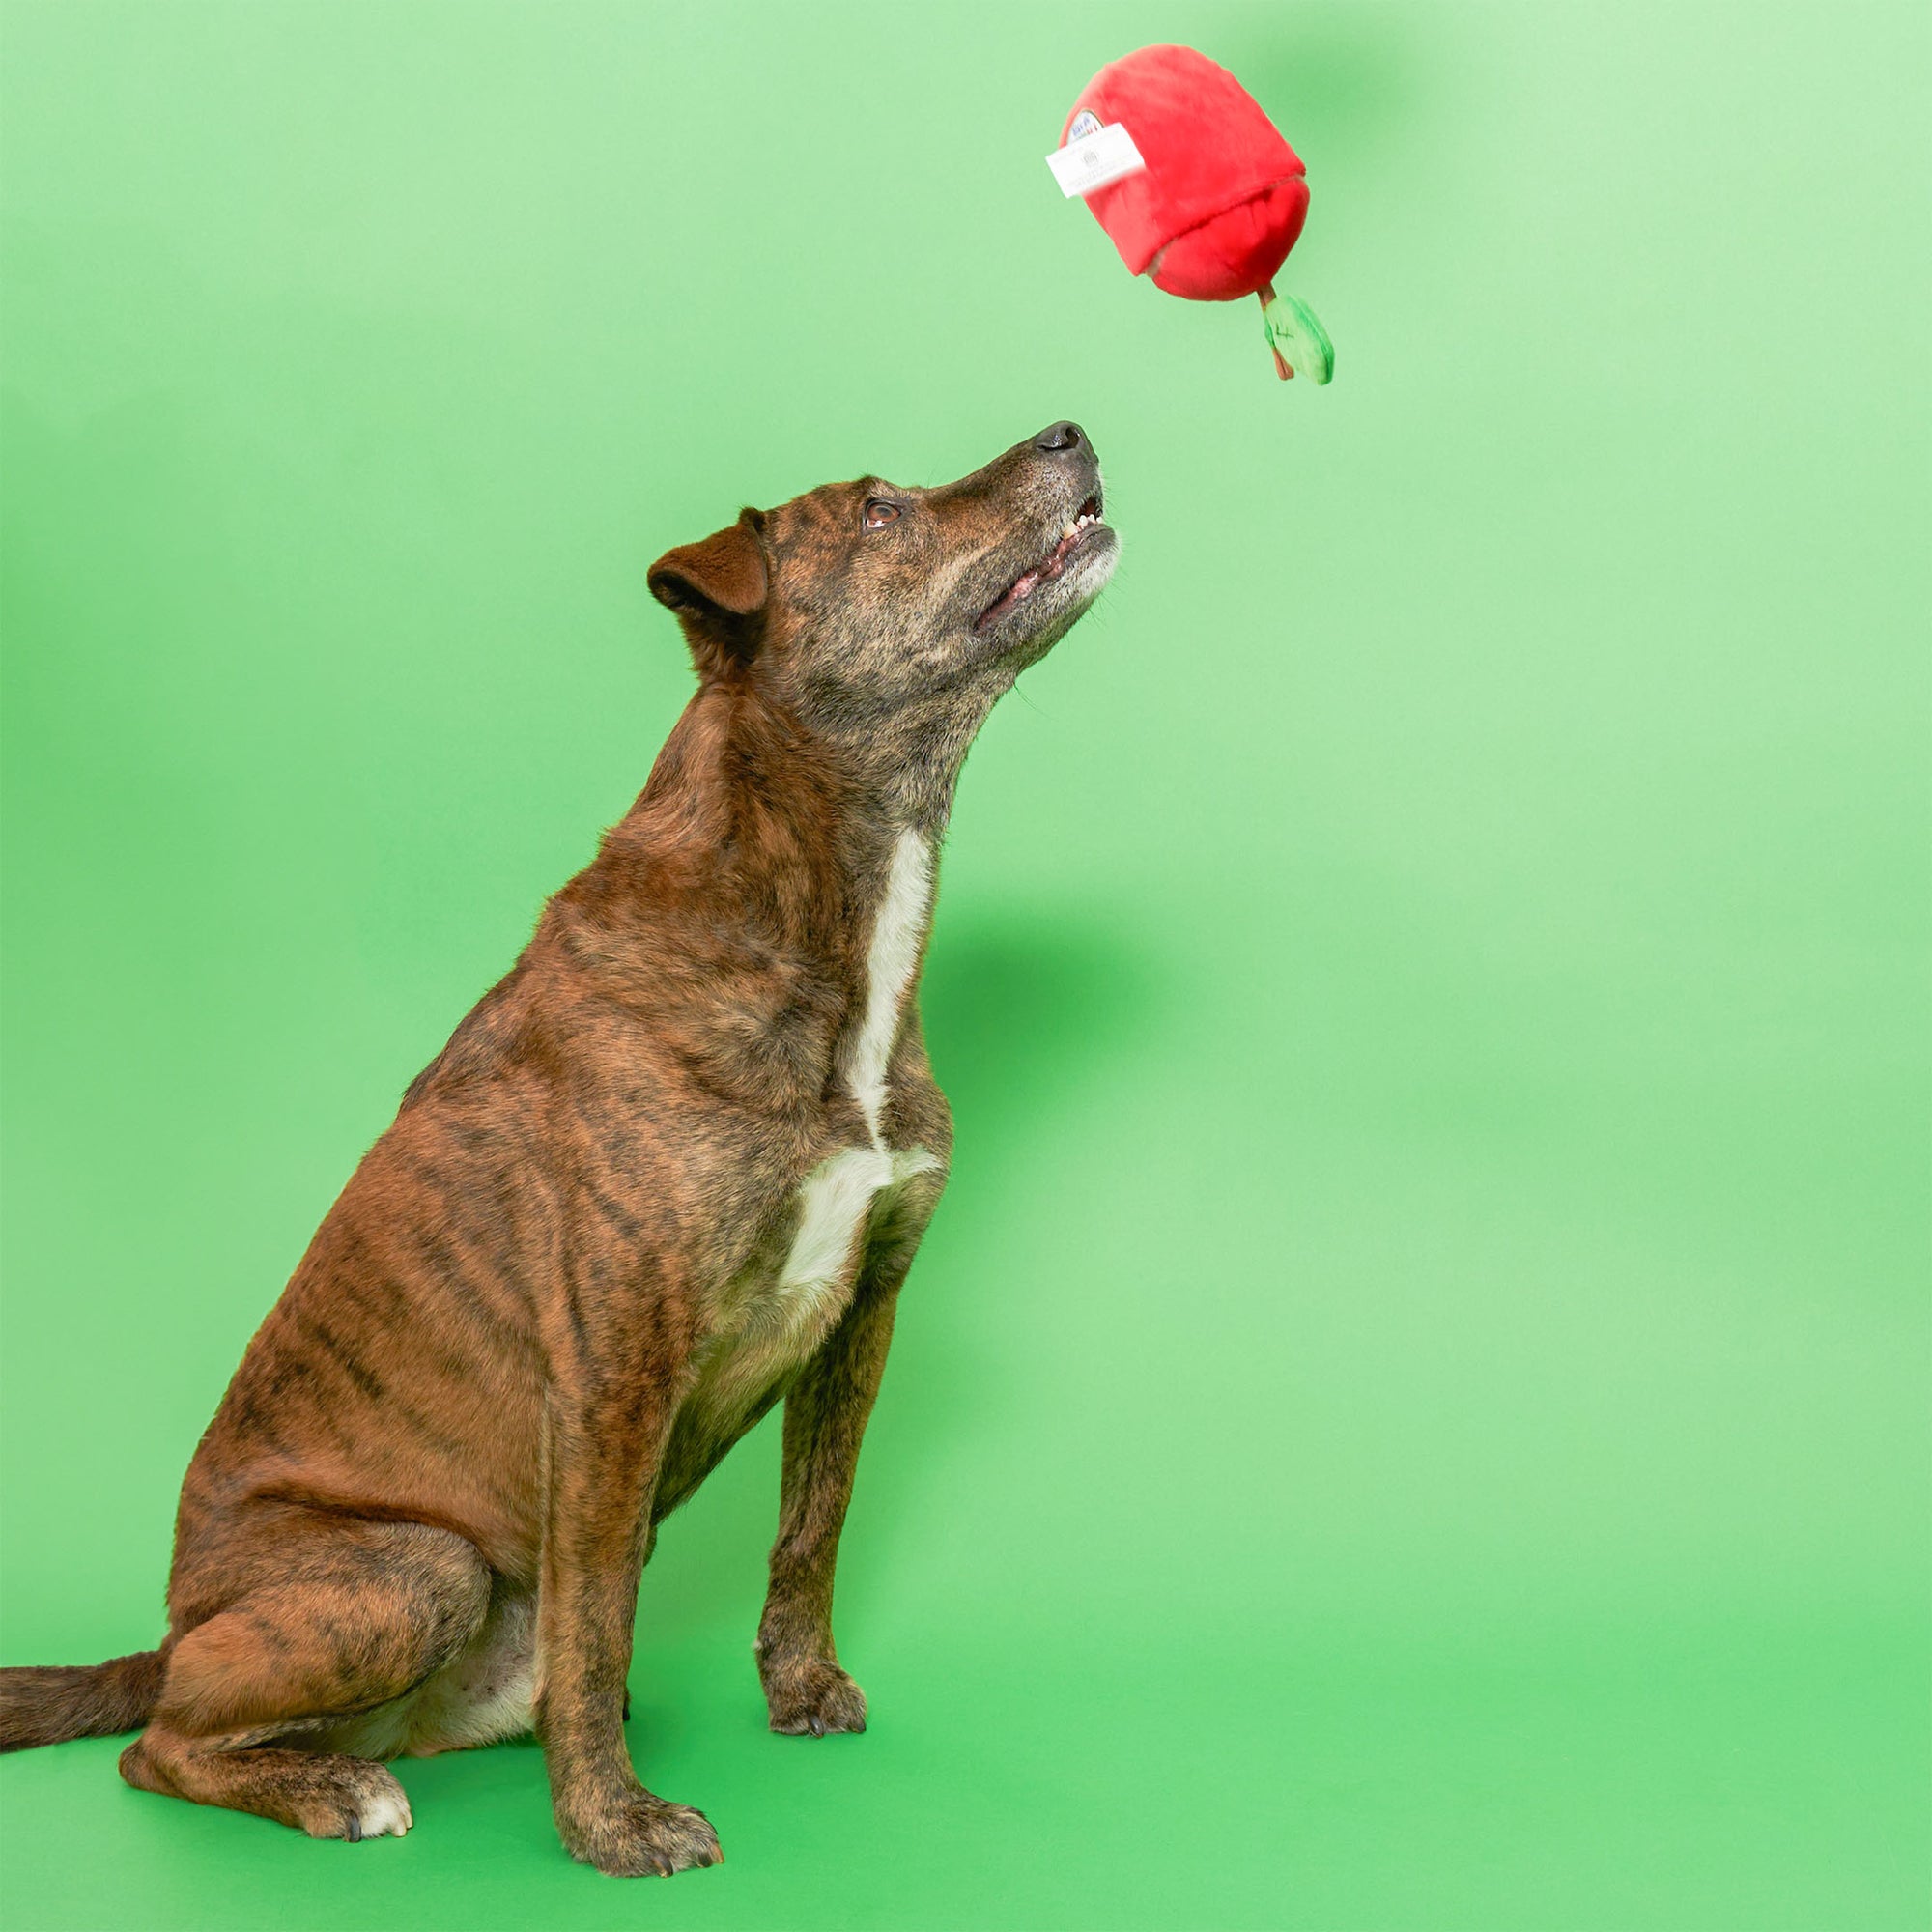 A brown dog sitting on a green background looking up at a red apple-shaped dog toy that is in mid-air.